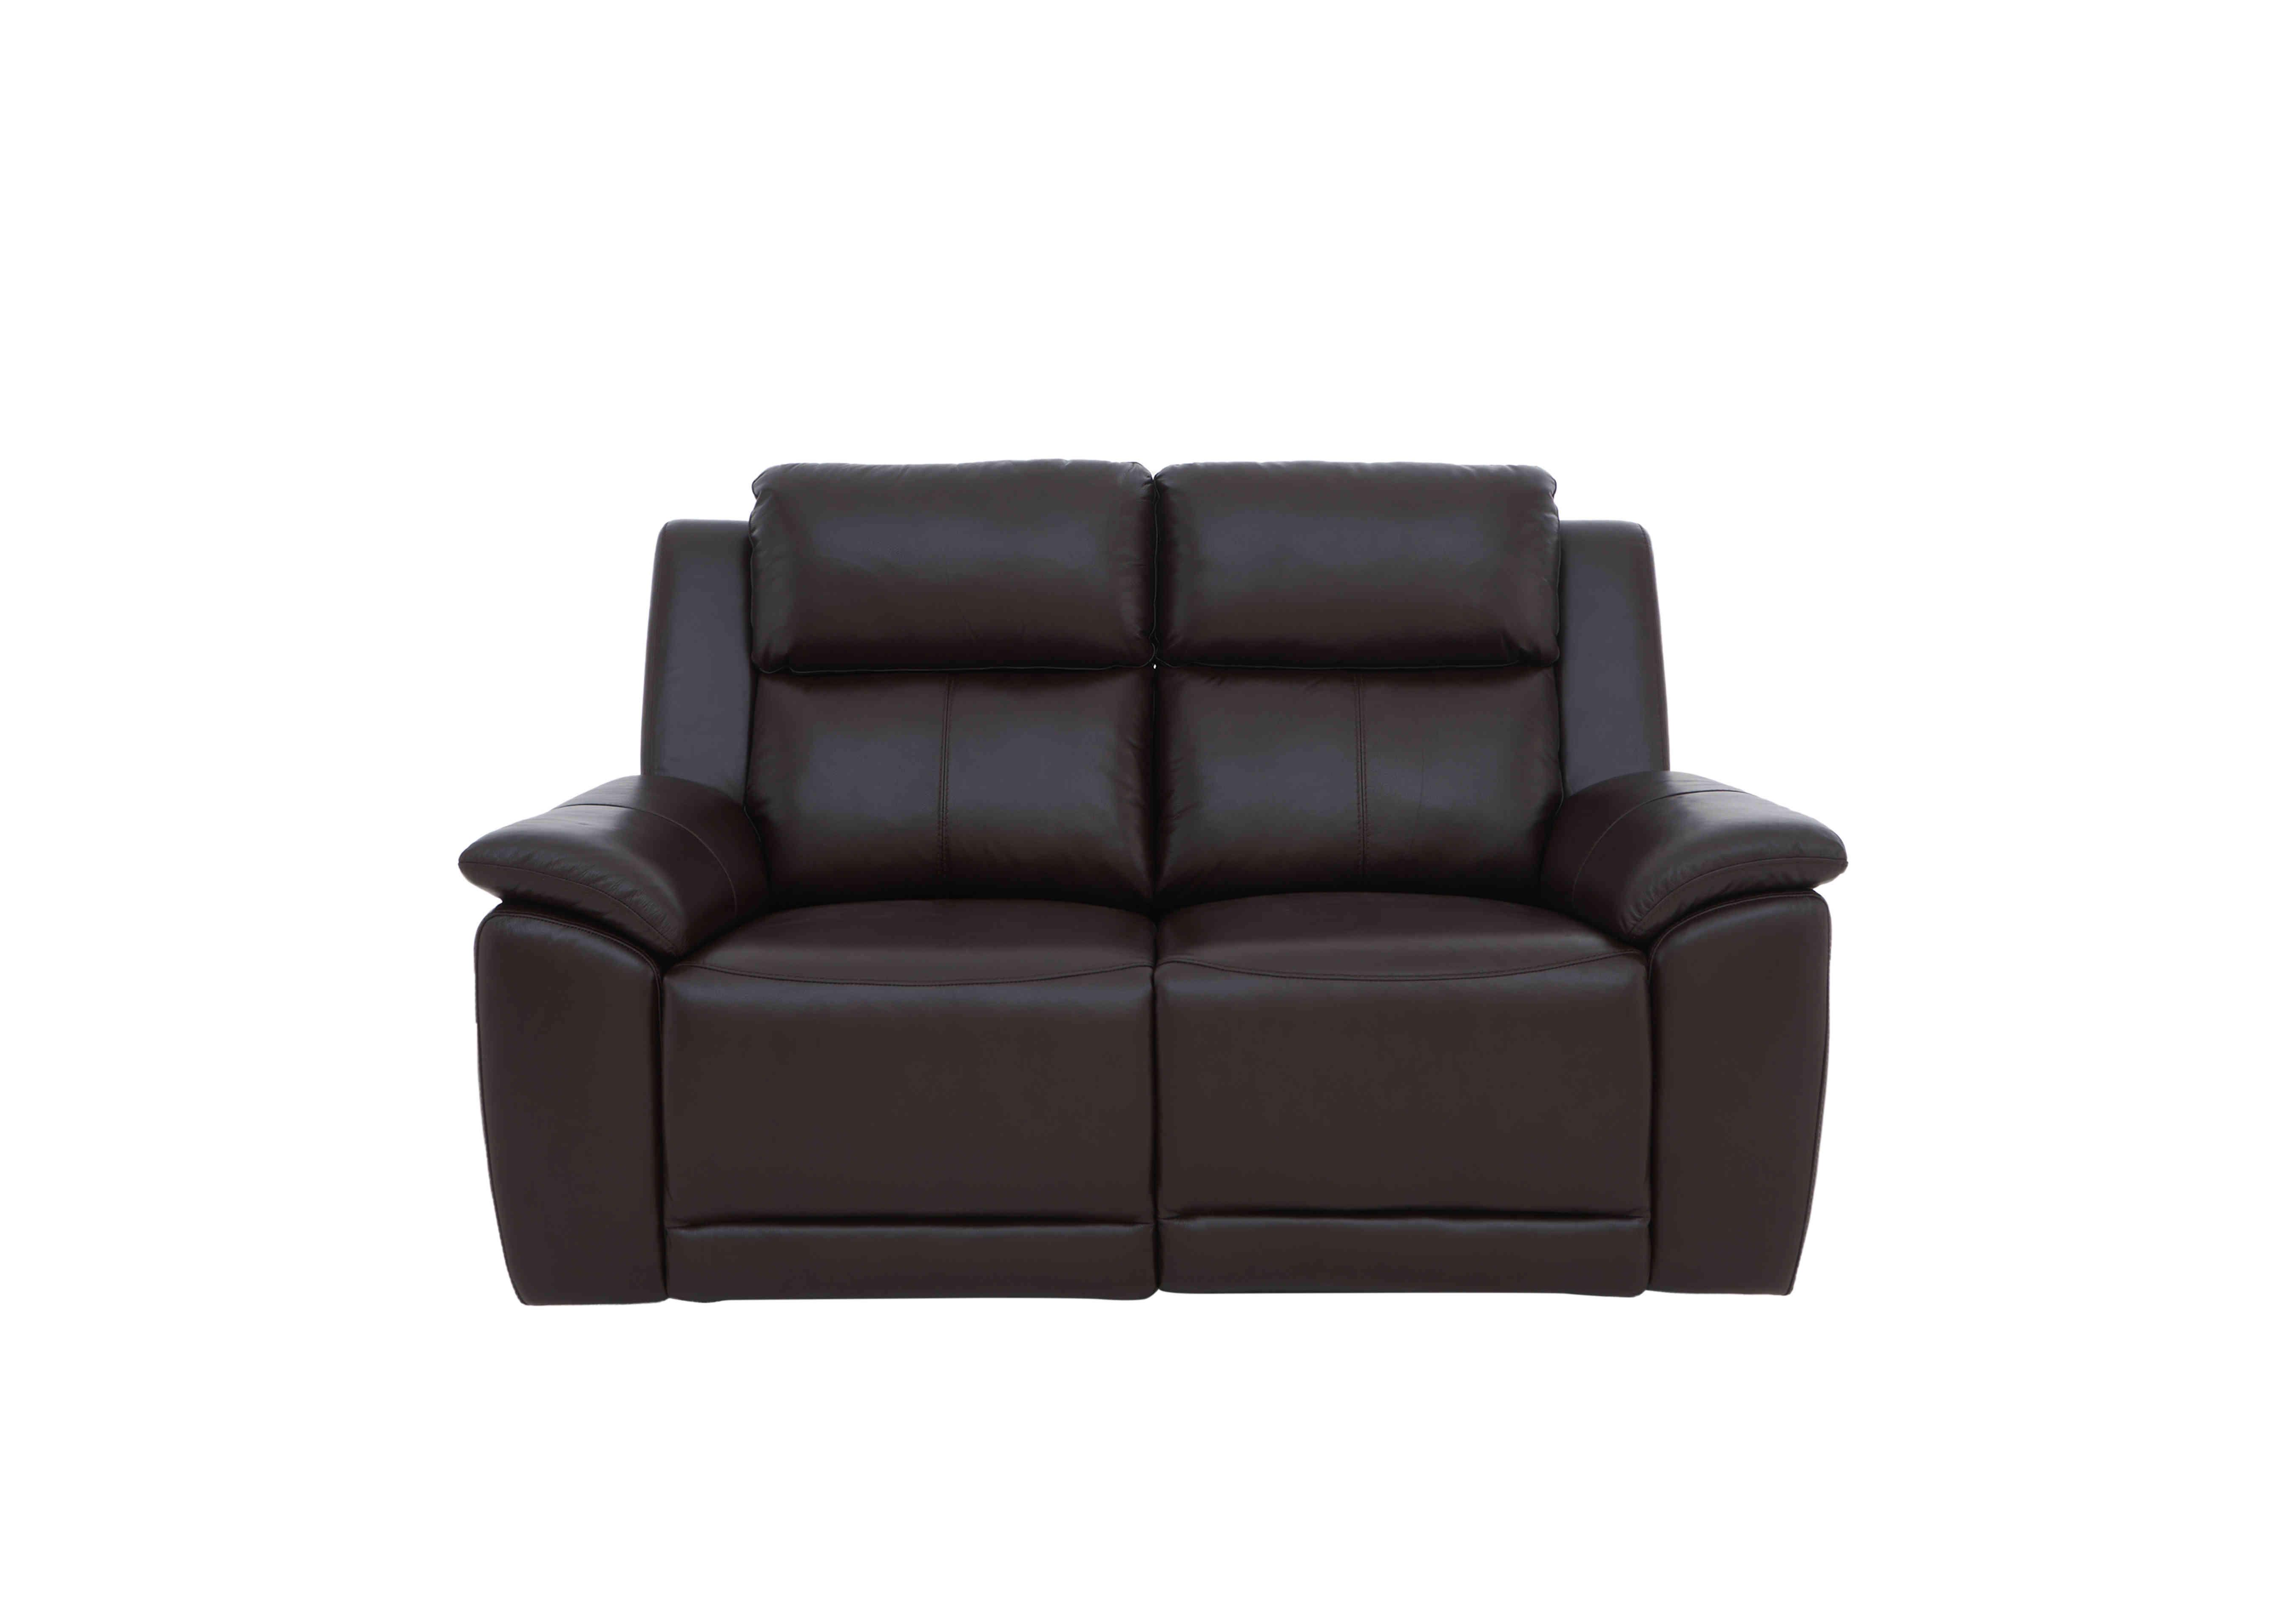 Utah 2 Seater Leather Power Recliner Sofa with Power Headrests and Power Lumbar in Espresso Lx-6413 on Furniture Village